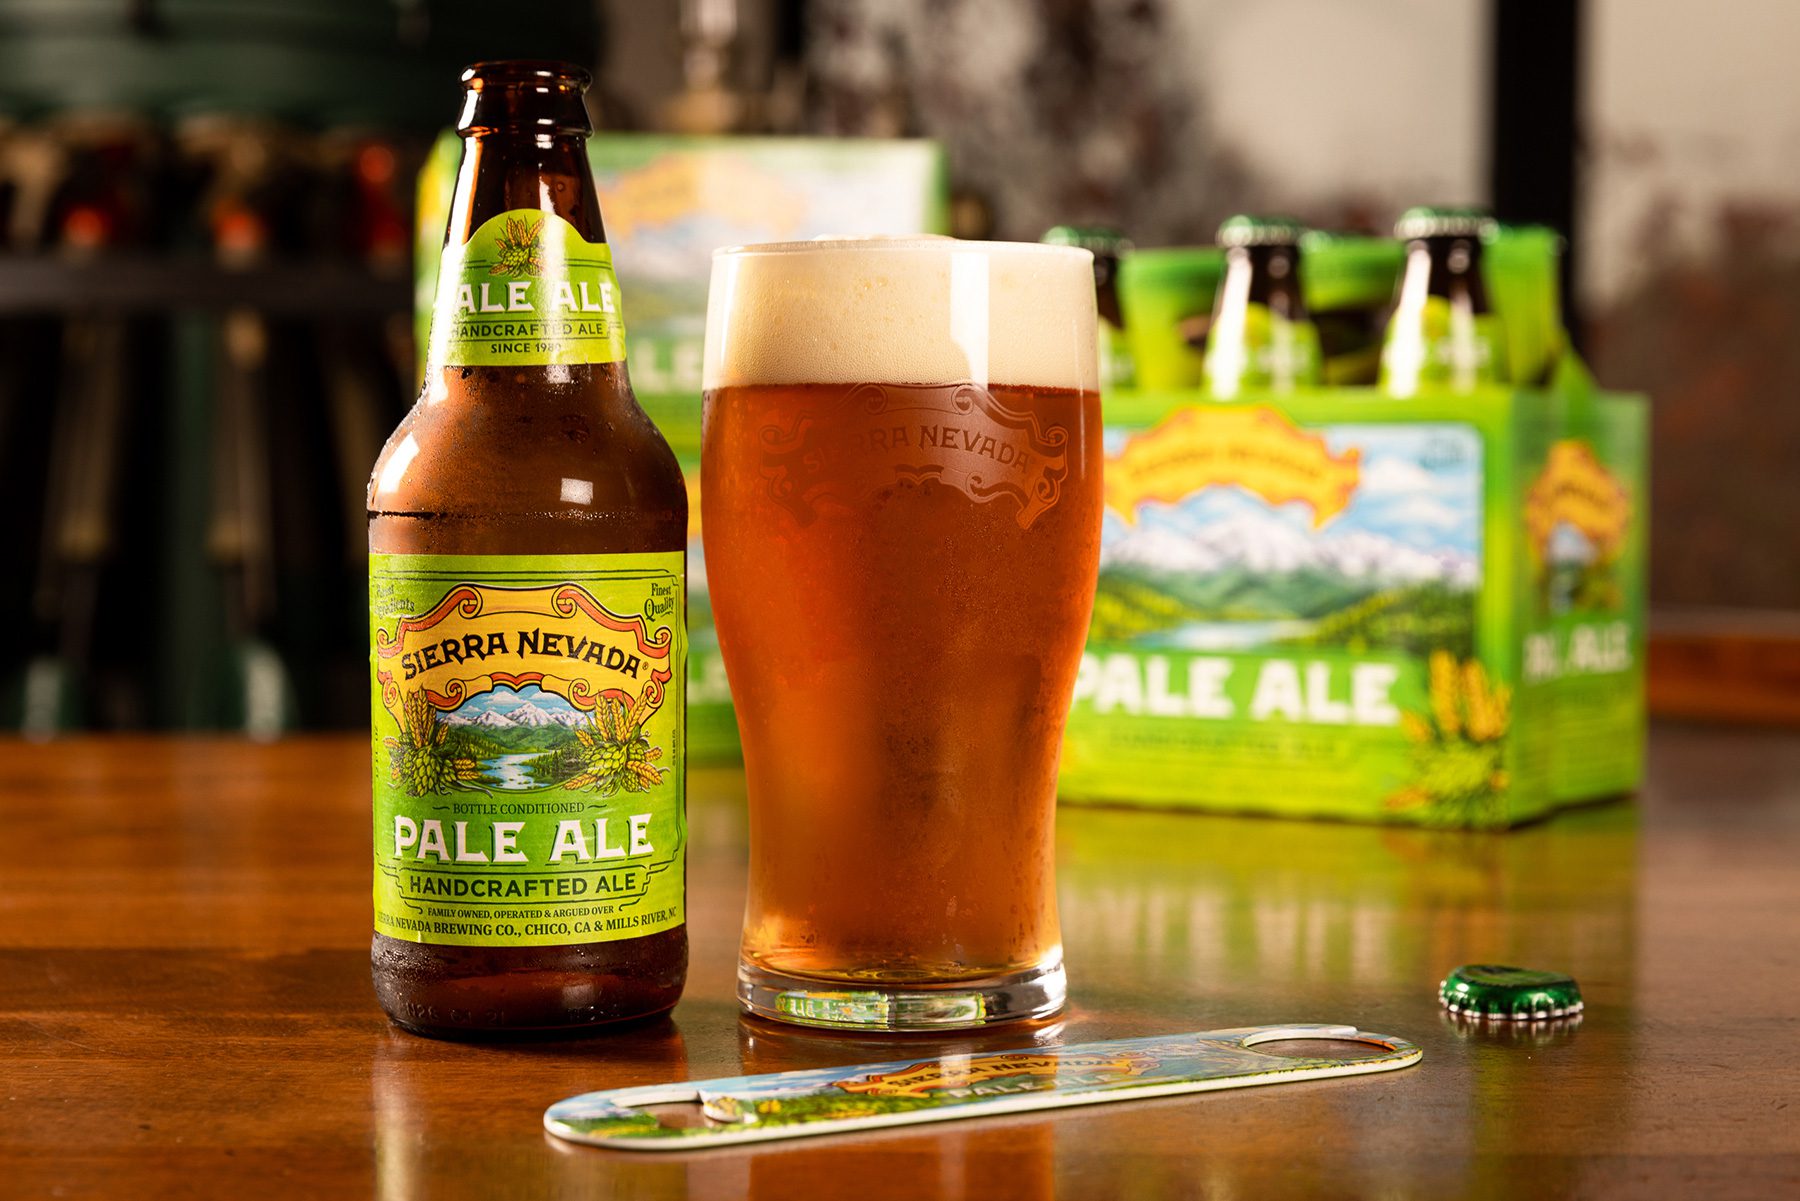 A bottle and full glass of Sierra Nevada Pale Ale